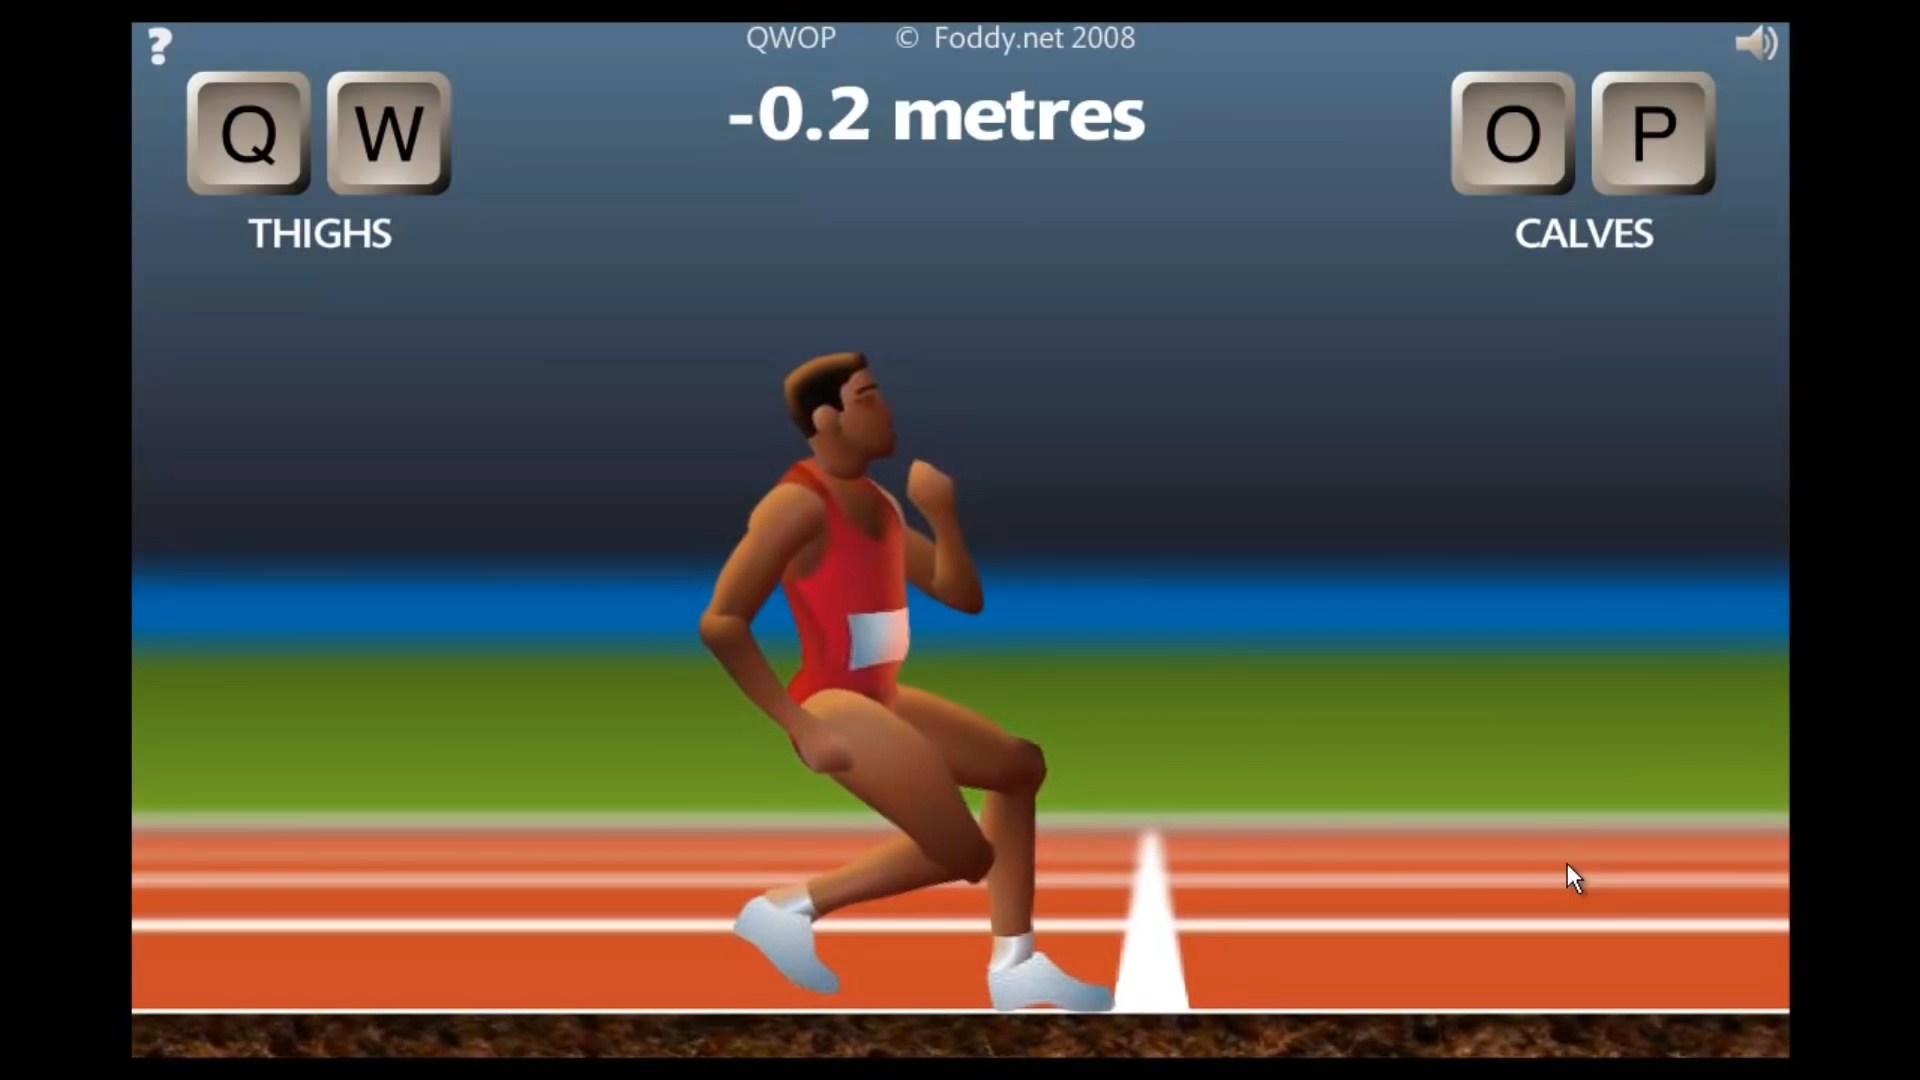 Best Free Web Browser Games: A Runner About to Move in QWOP